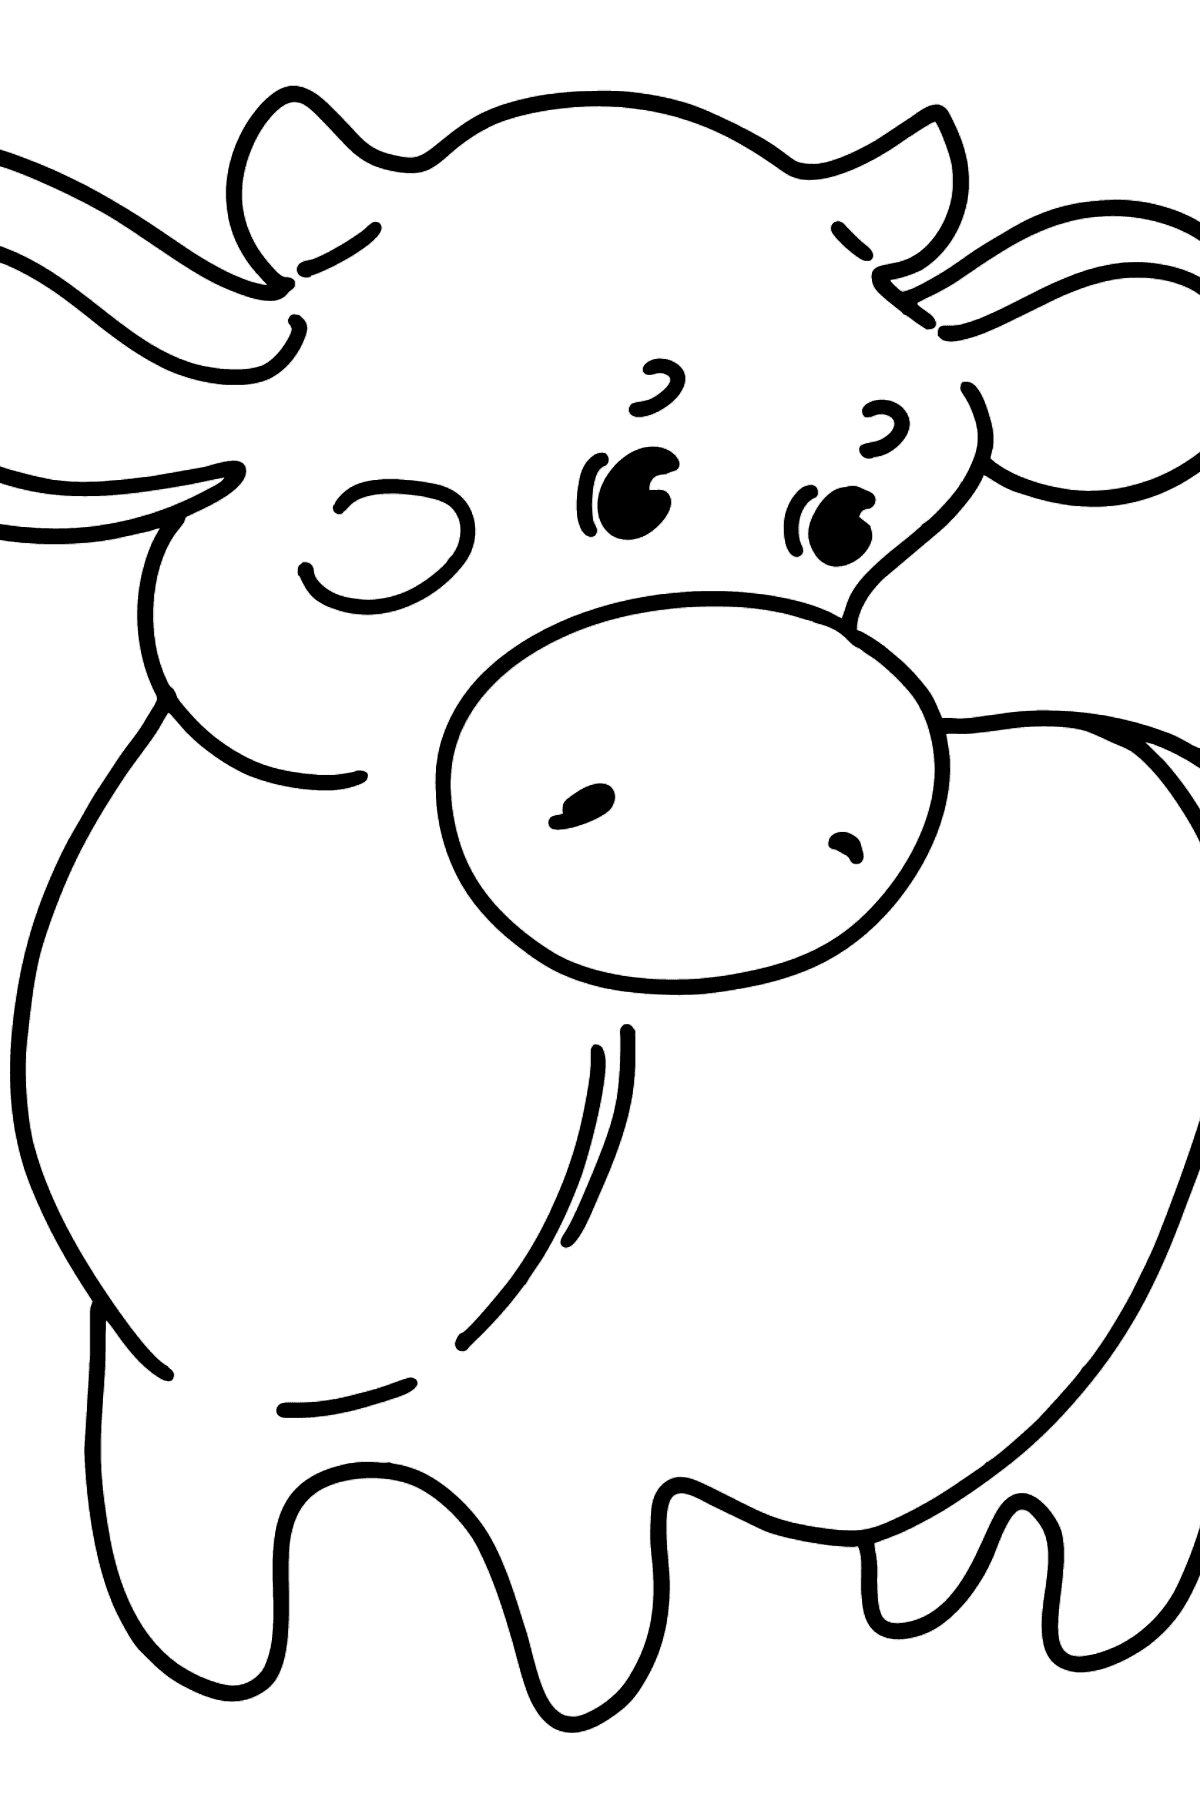 Calf coloring page - Coloring Pages for Kids